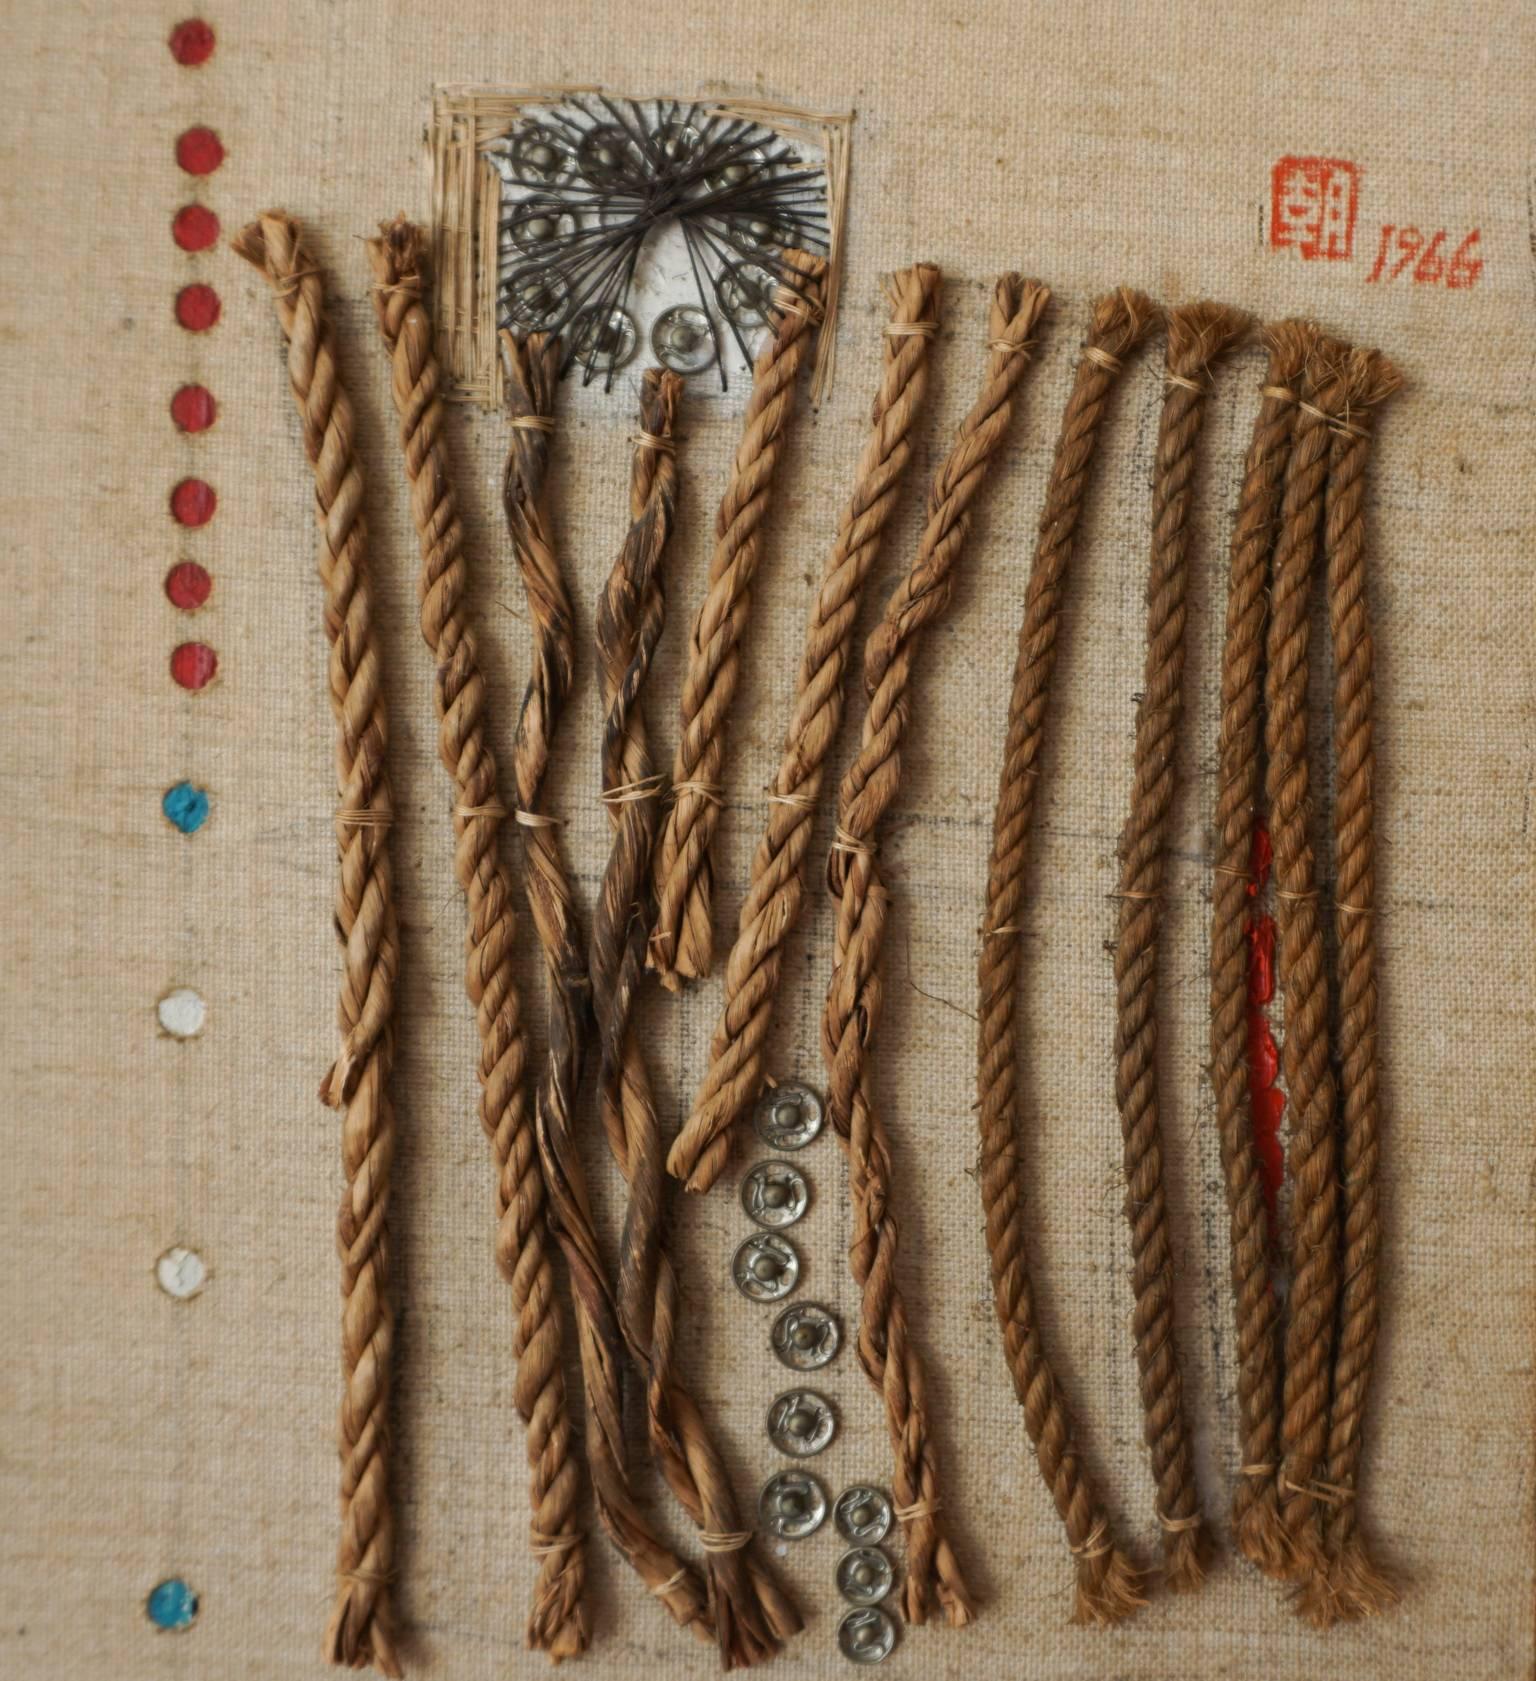 Wall panel with stitching, paint and rope. Signed and dated, 1966.